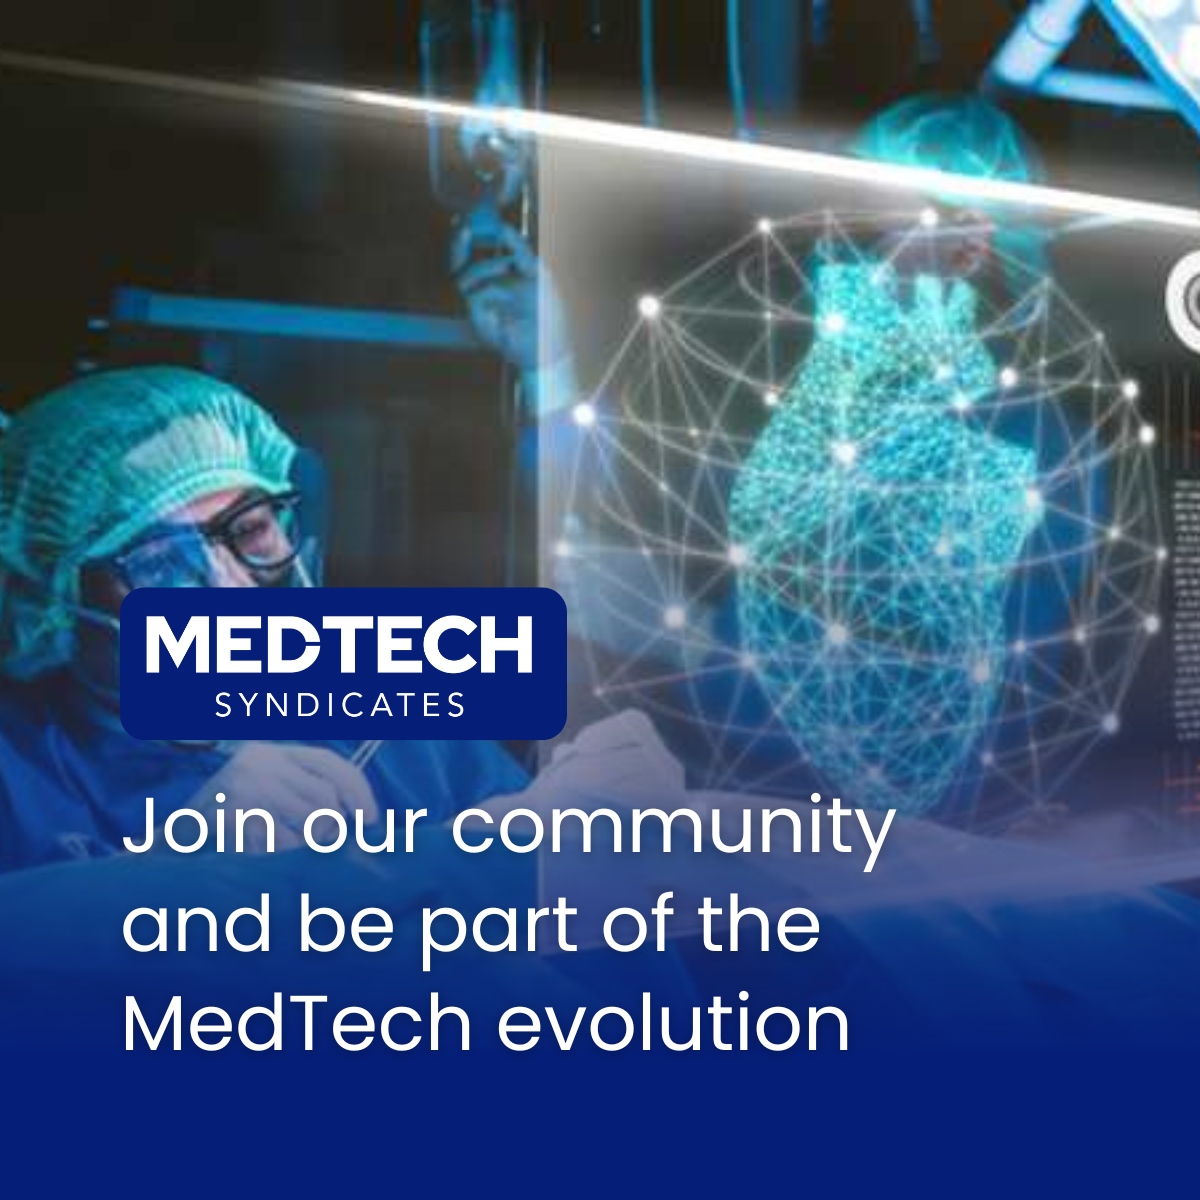 MedTech Syndicates offers our member clinicians more than just investment opportunities. 👨‍⚕️ Join our community and be part of the MedTech evolution. #ClinicianCollaboration #MedTechSyndicates #SeedFundingJourney #MedTech #SeedFunding